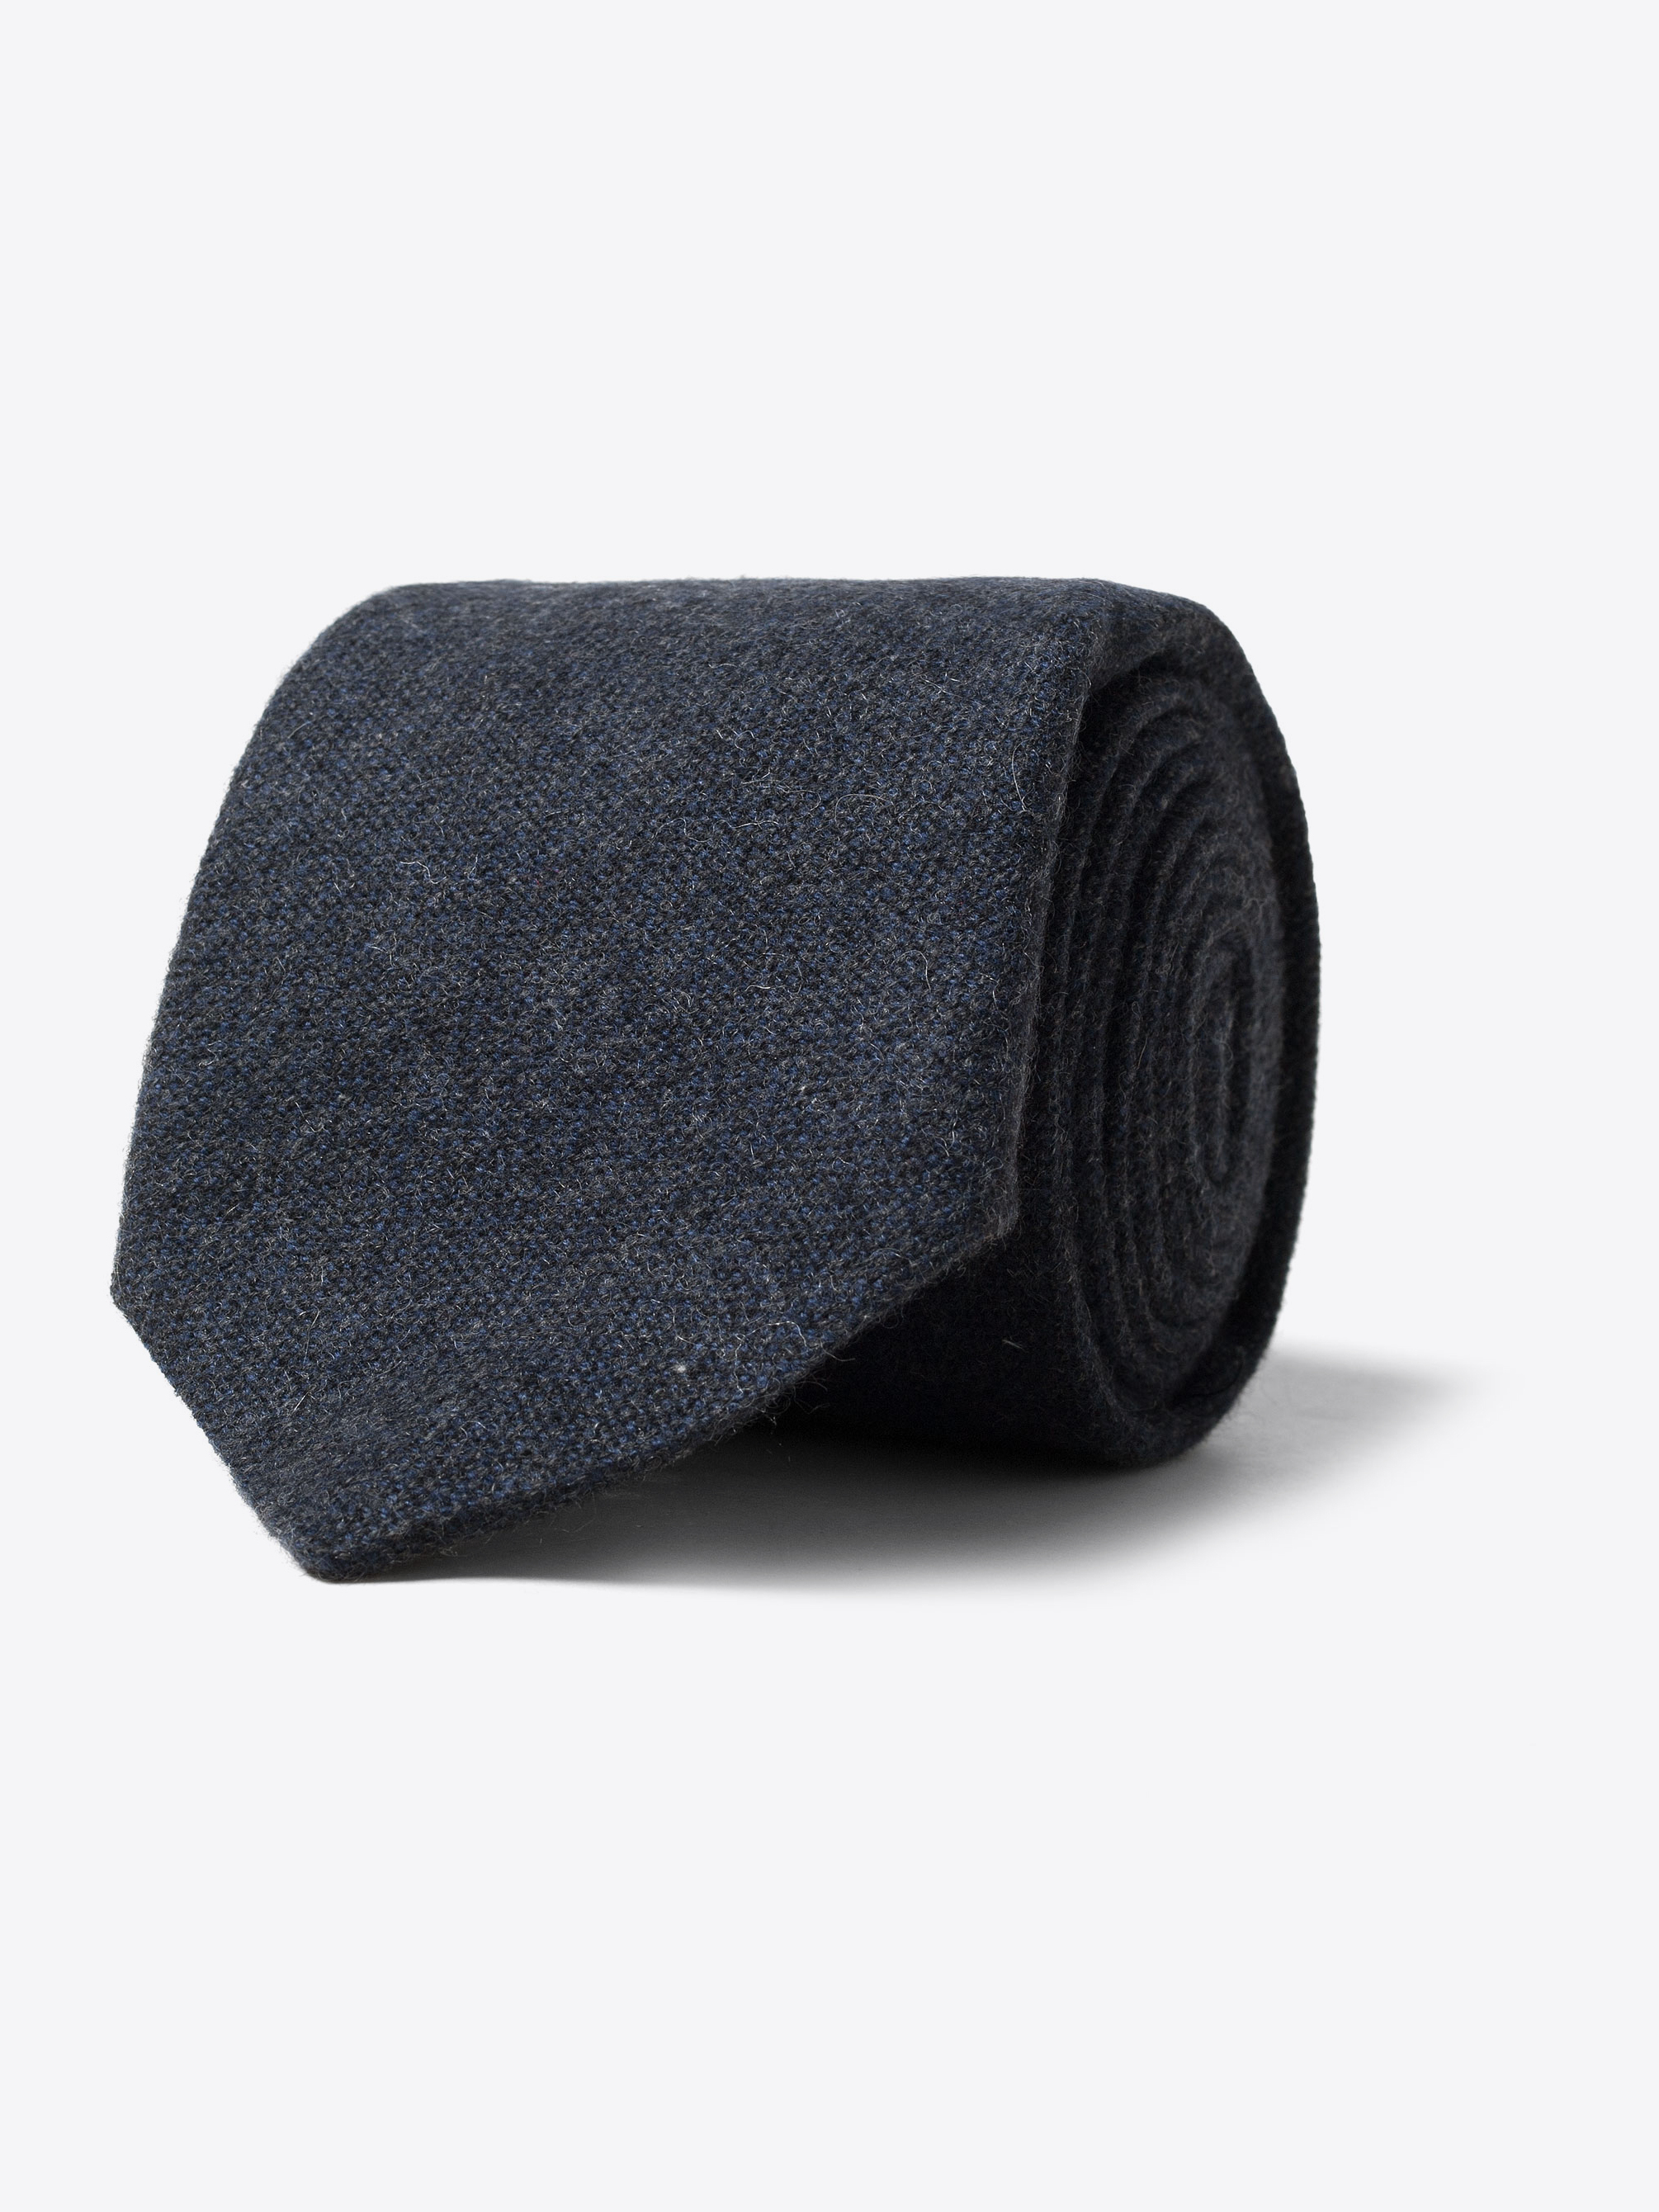 Zoom Image of Charcoal Cashmere Tie